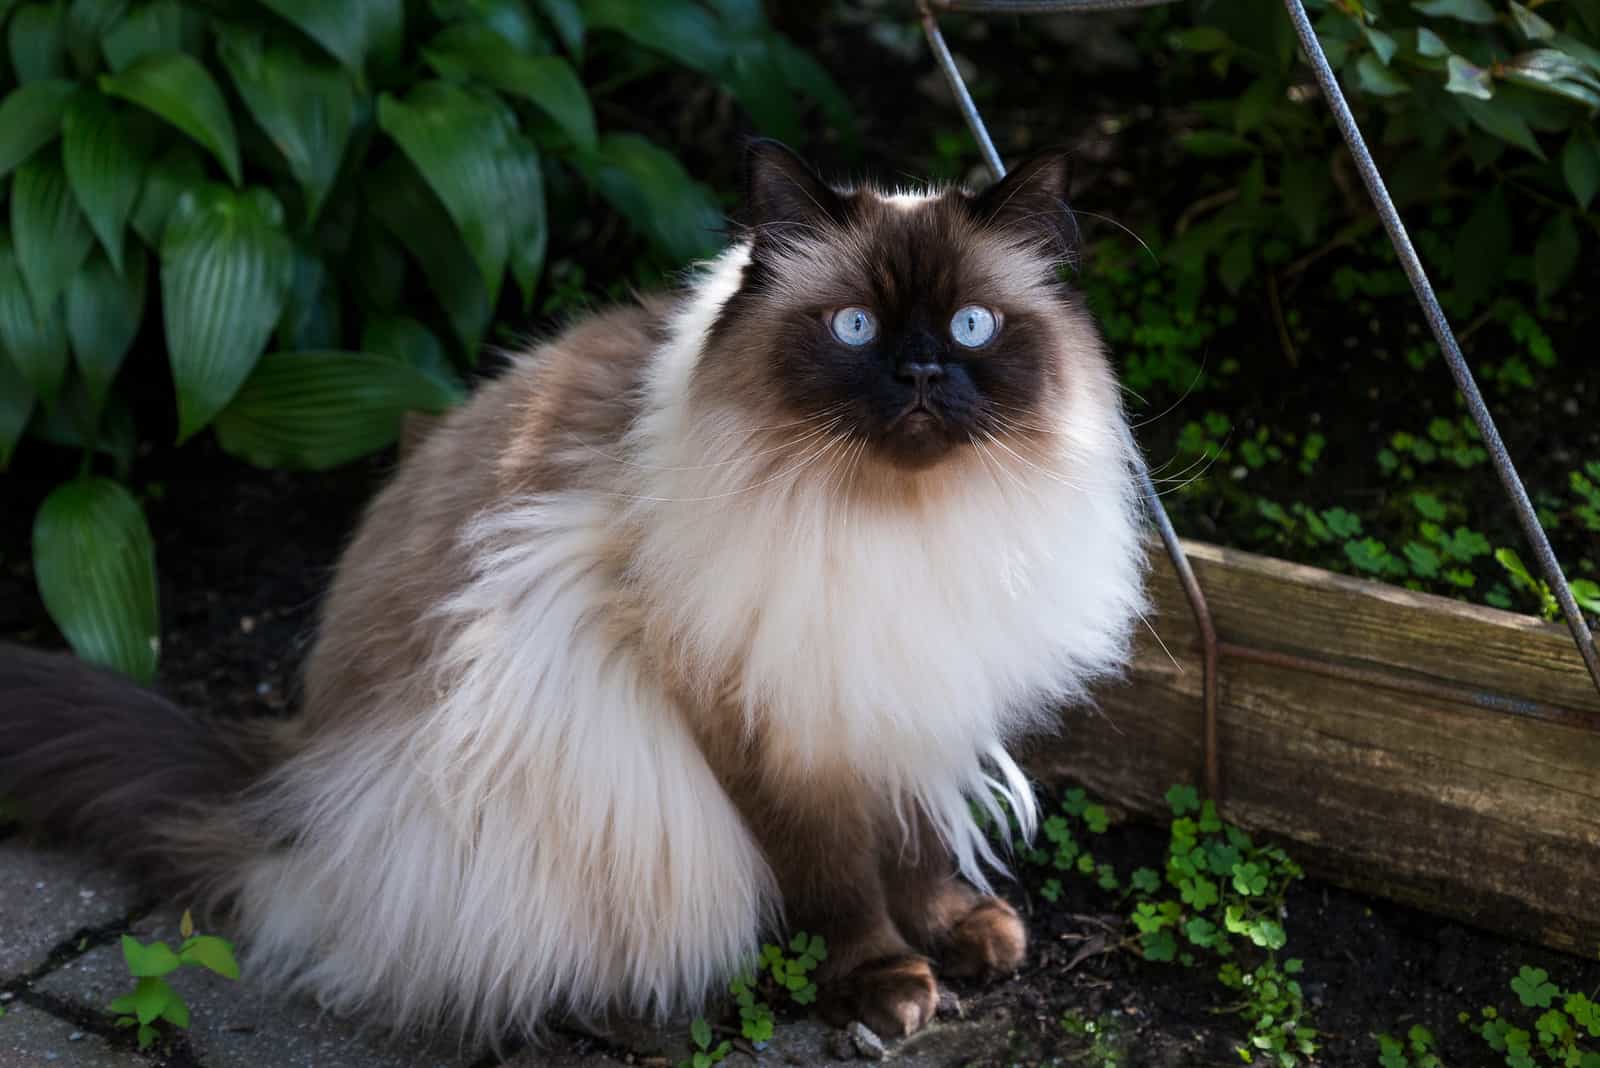 the Himalayan cat is sitting in the garden